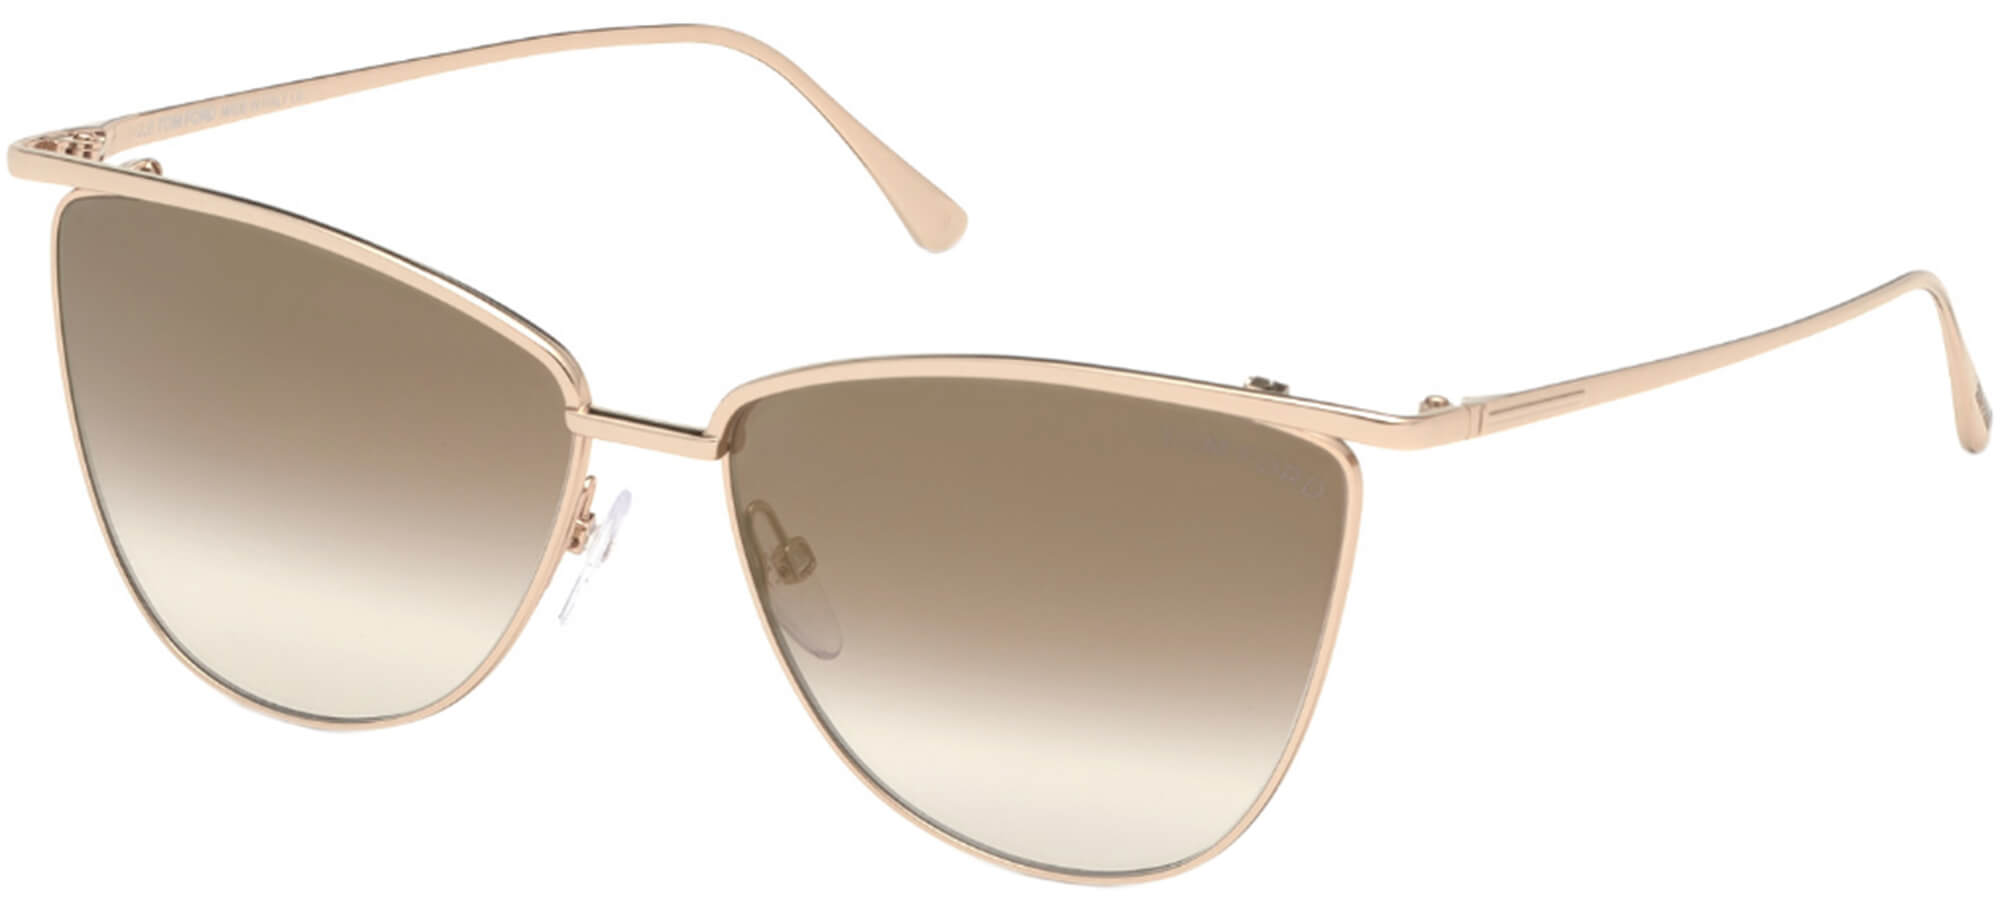 Tom FordVERONICA FT 0684Rose Gold/brown Shaded (28G K)